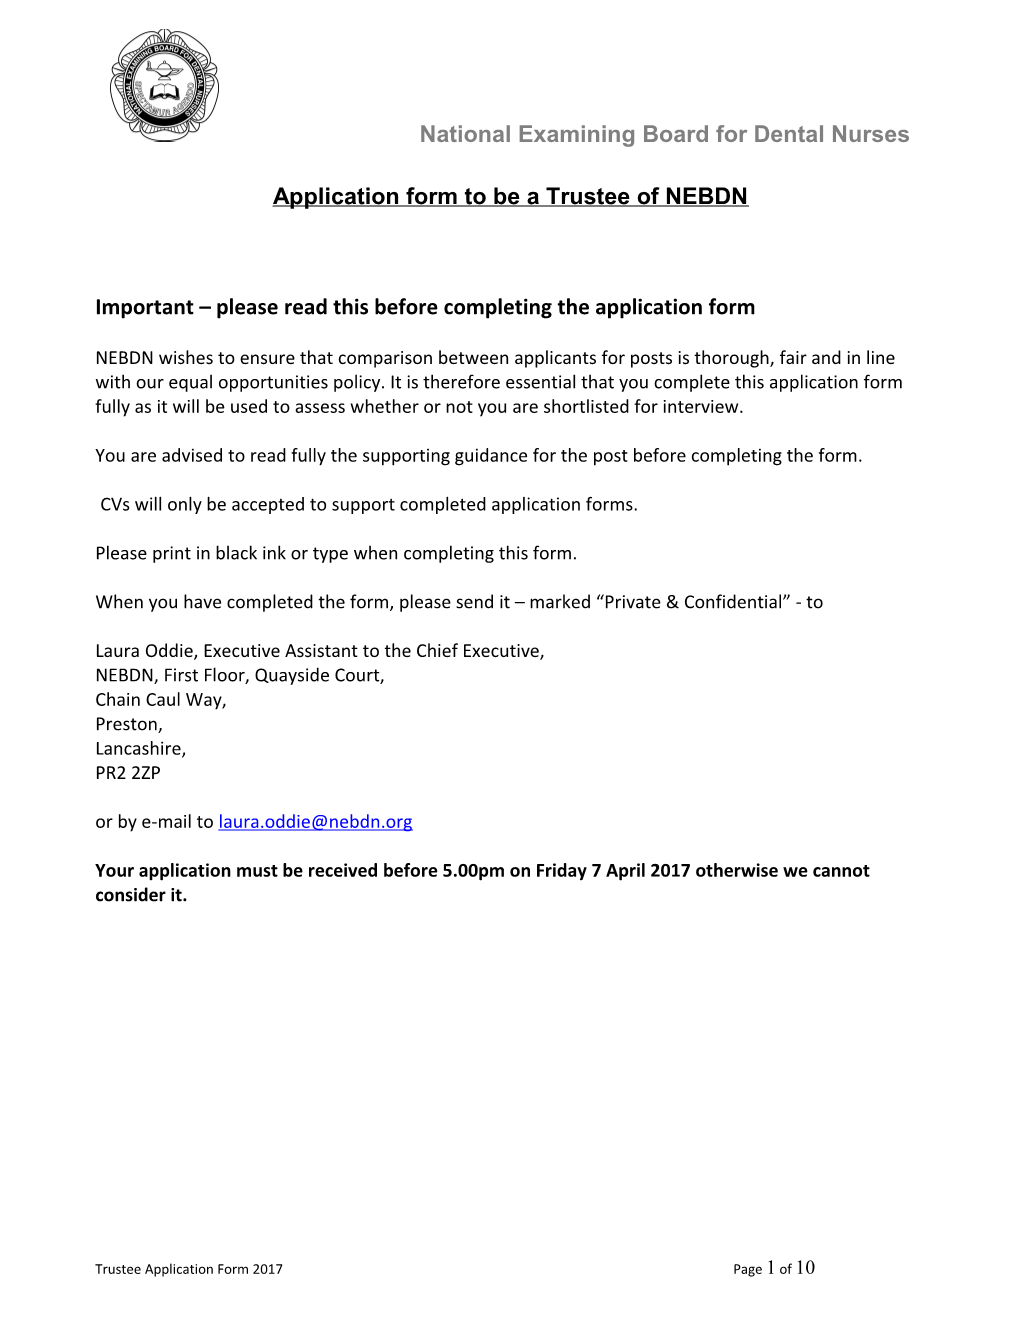 Application Form to Be a Trustee of NEBDN